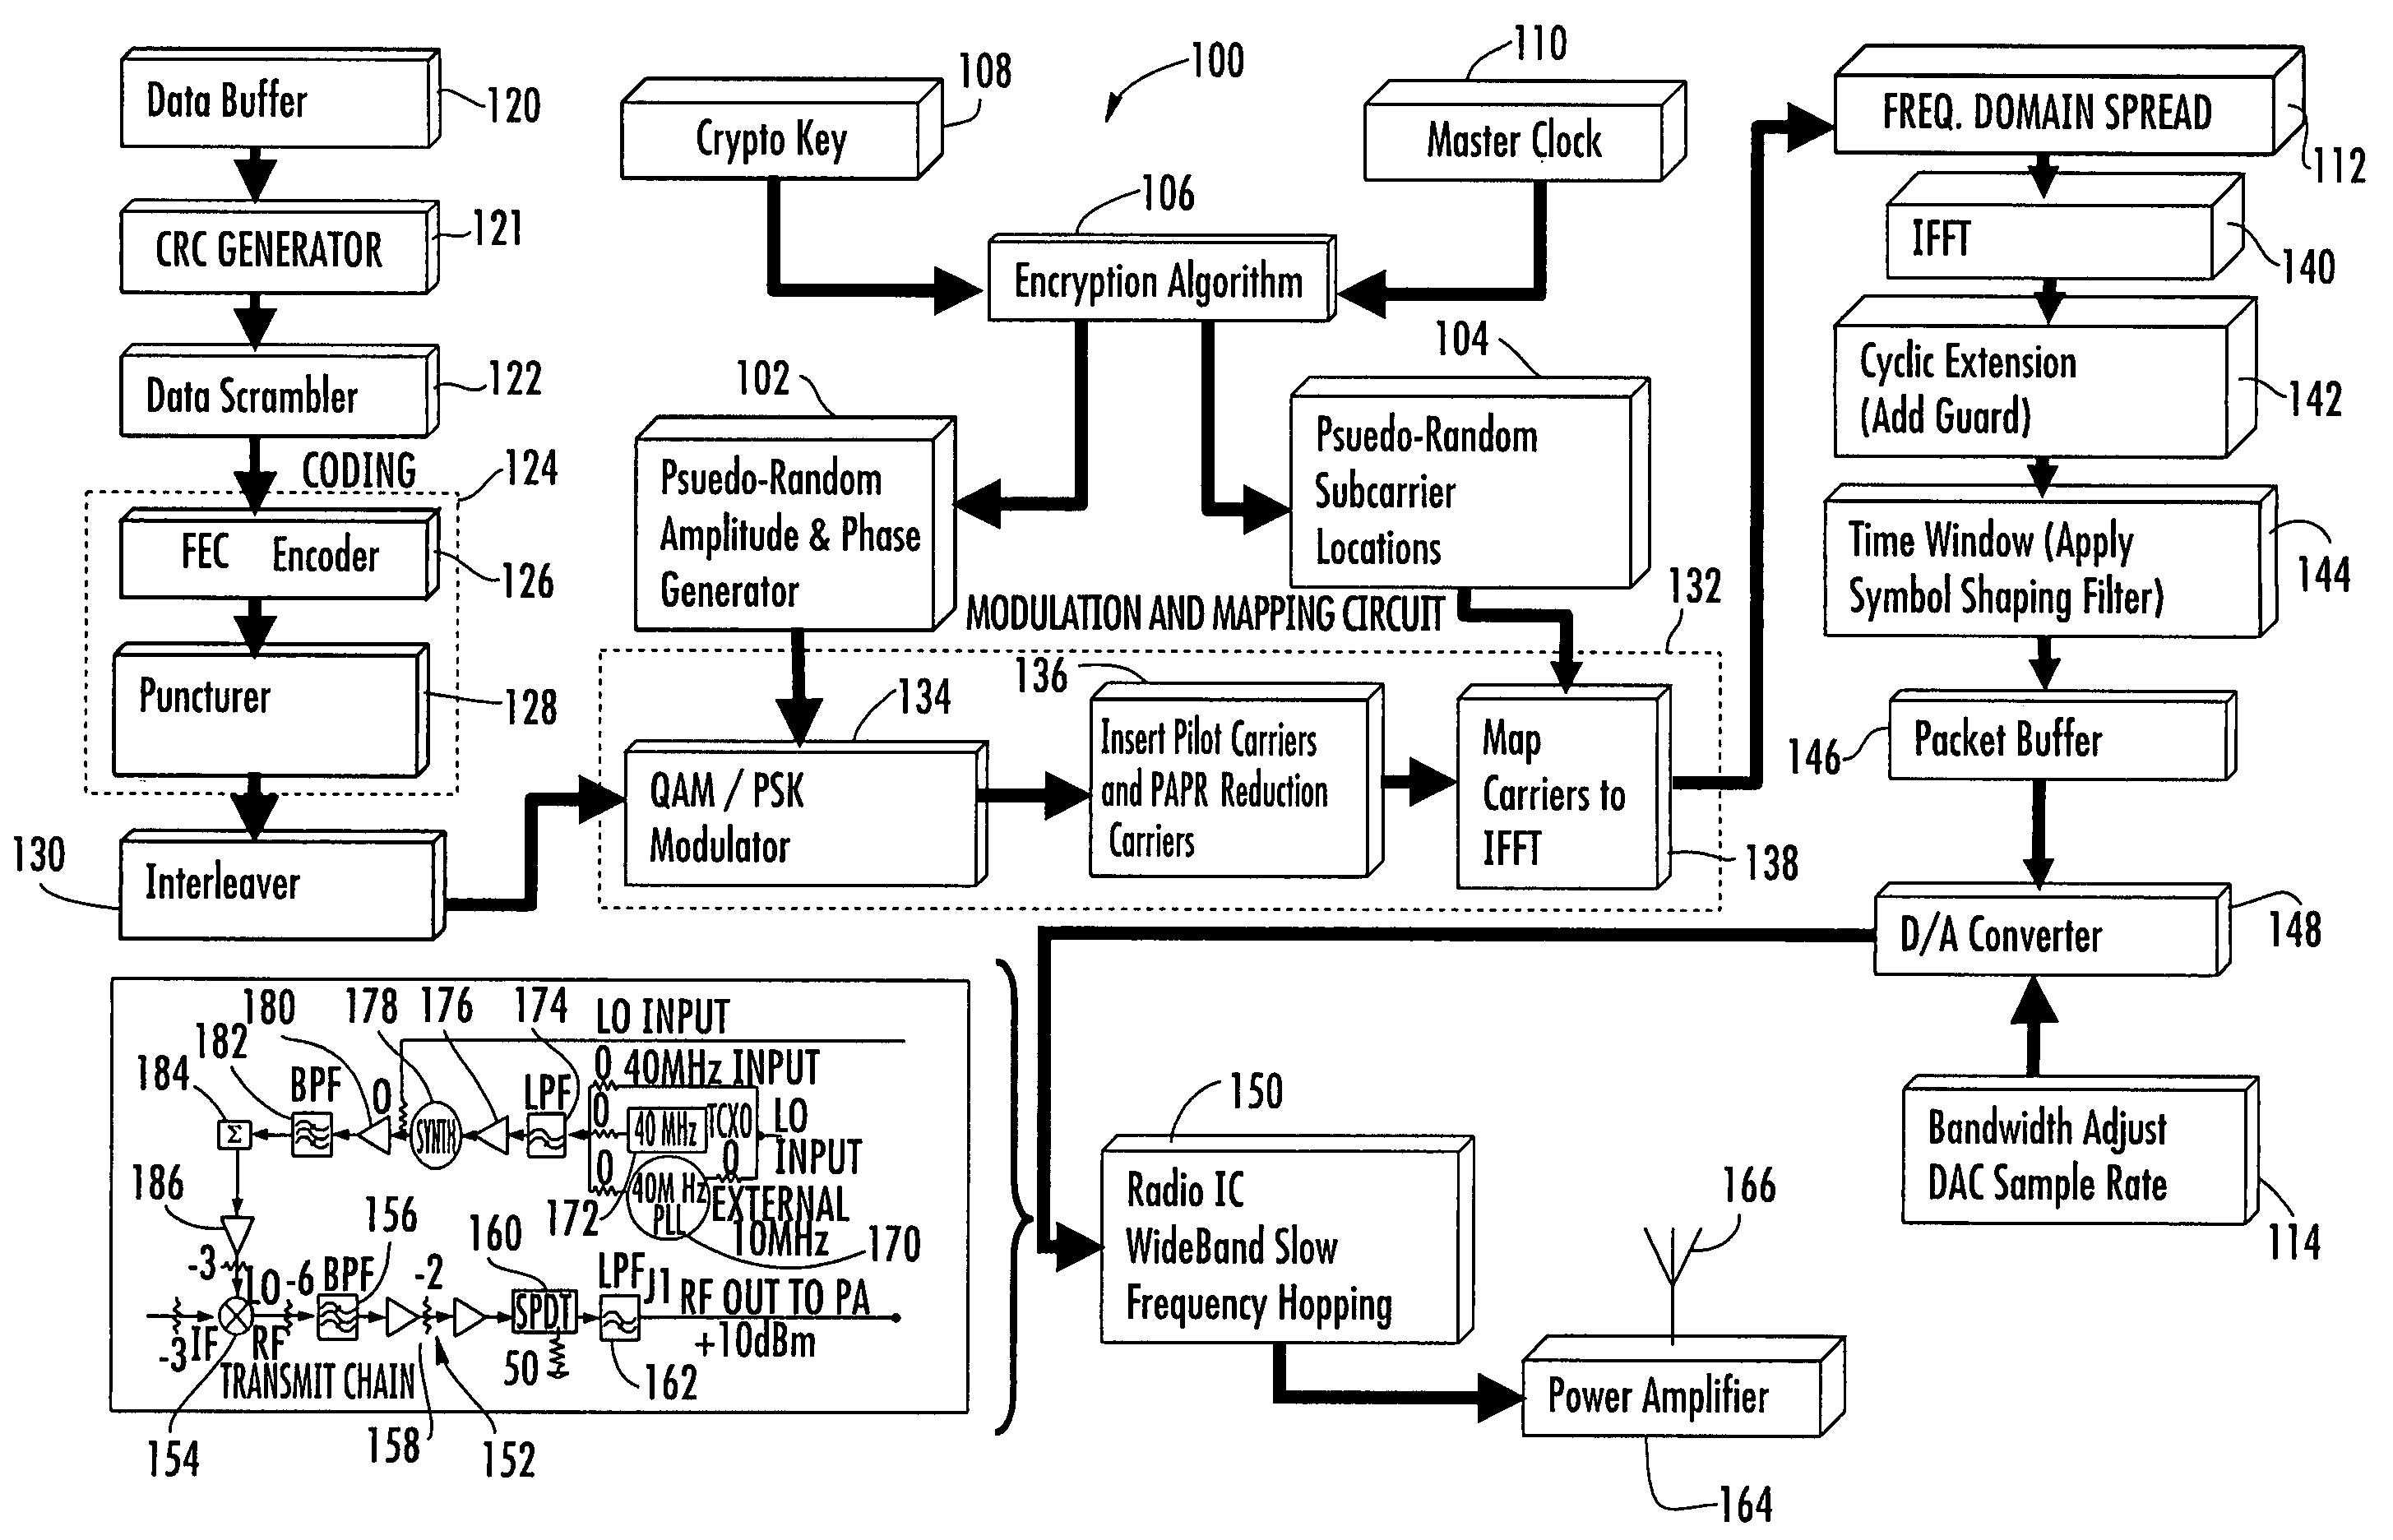 System and method for communicating data using symbol-based randomized orthogonal frequency division multiplexing (OFDM)